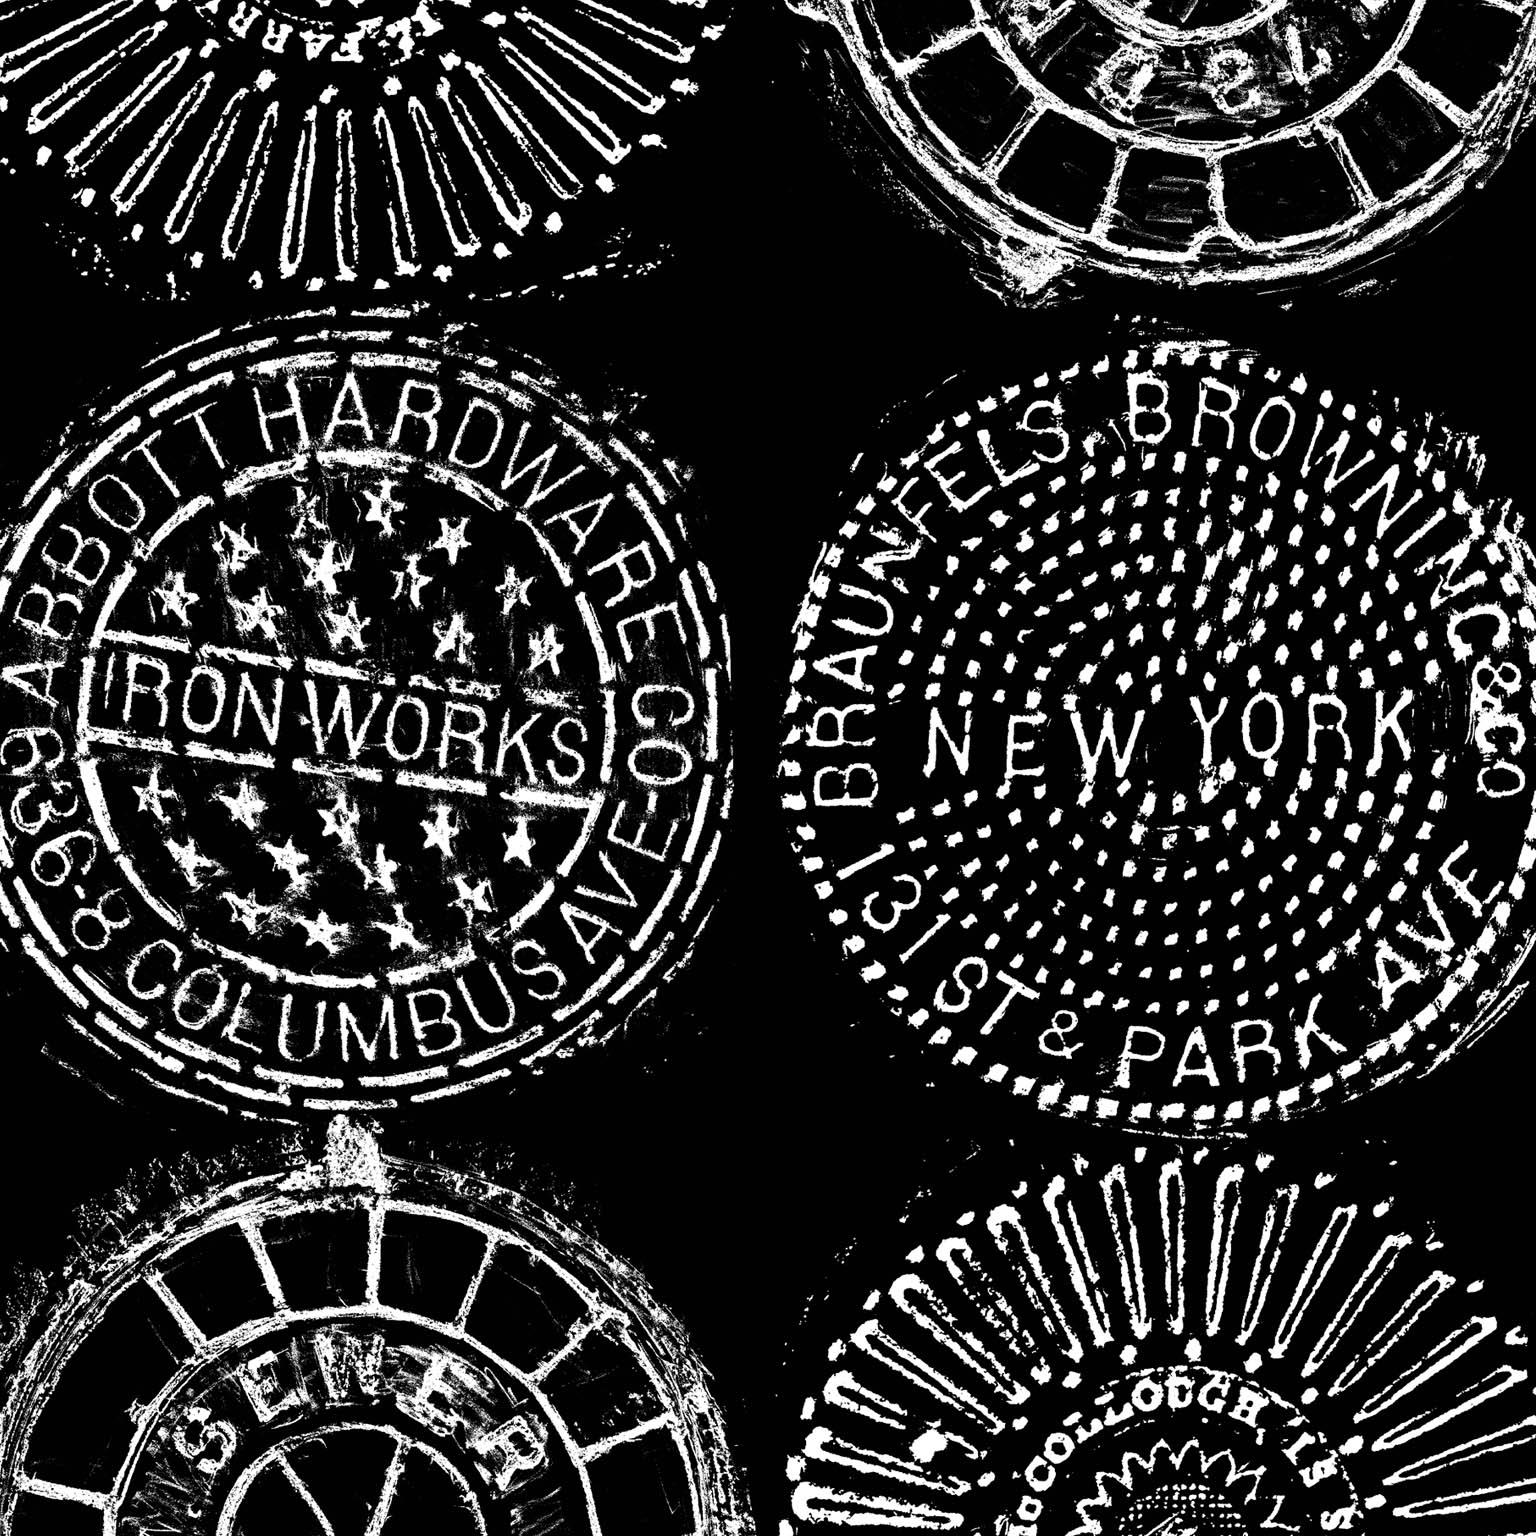 NYC Manhole Printed Wallpaper, White on Black Manhole Cover For Sale